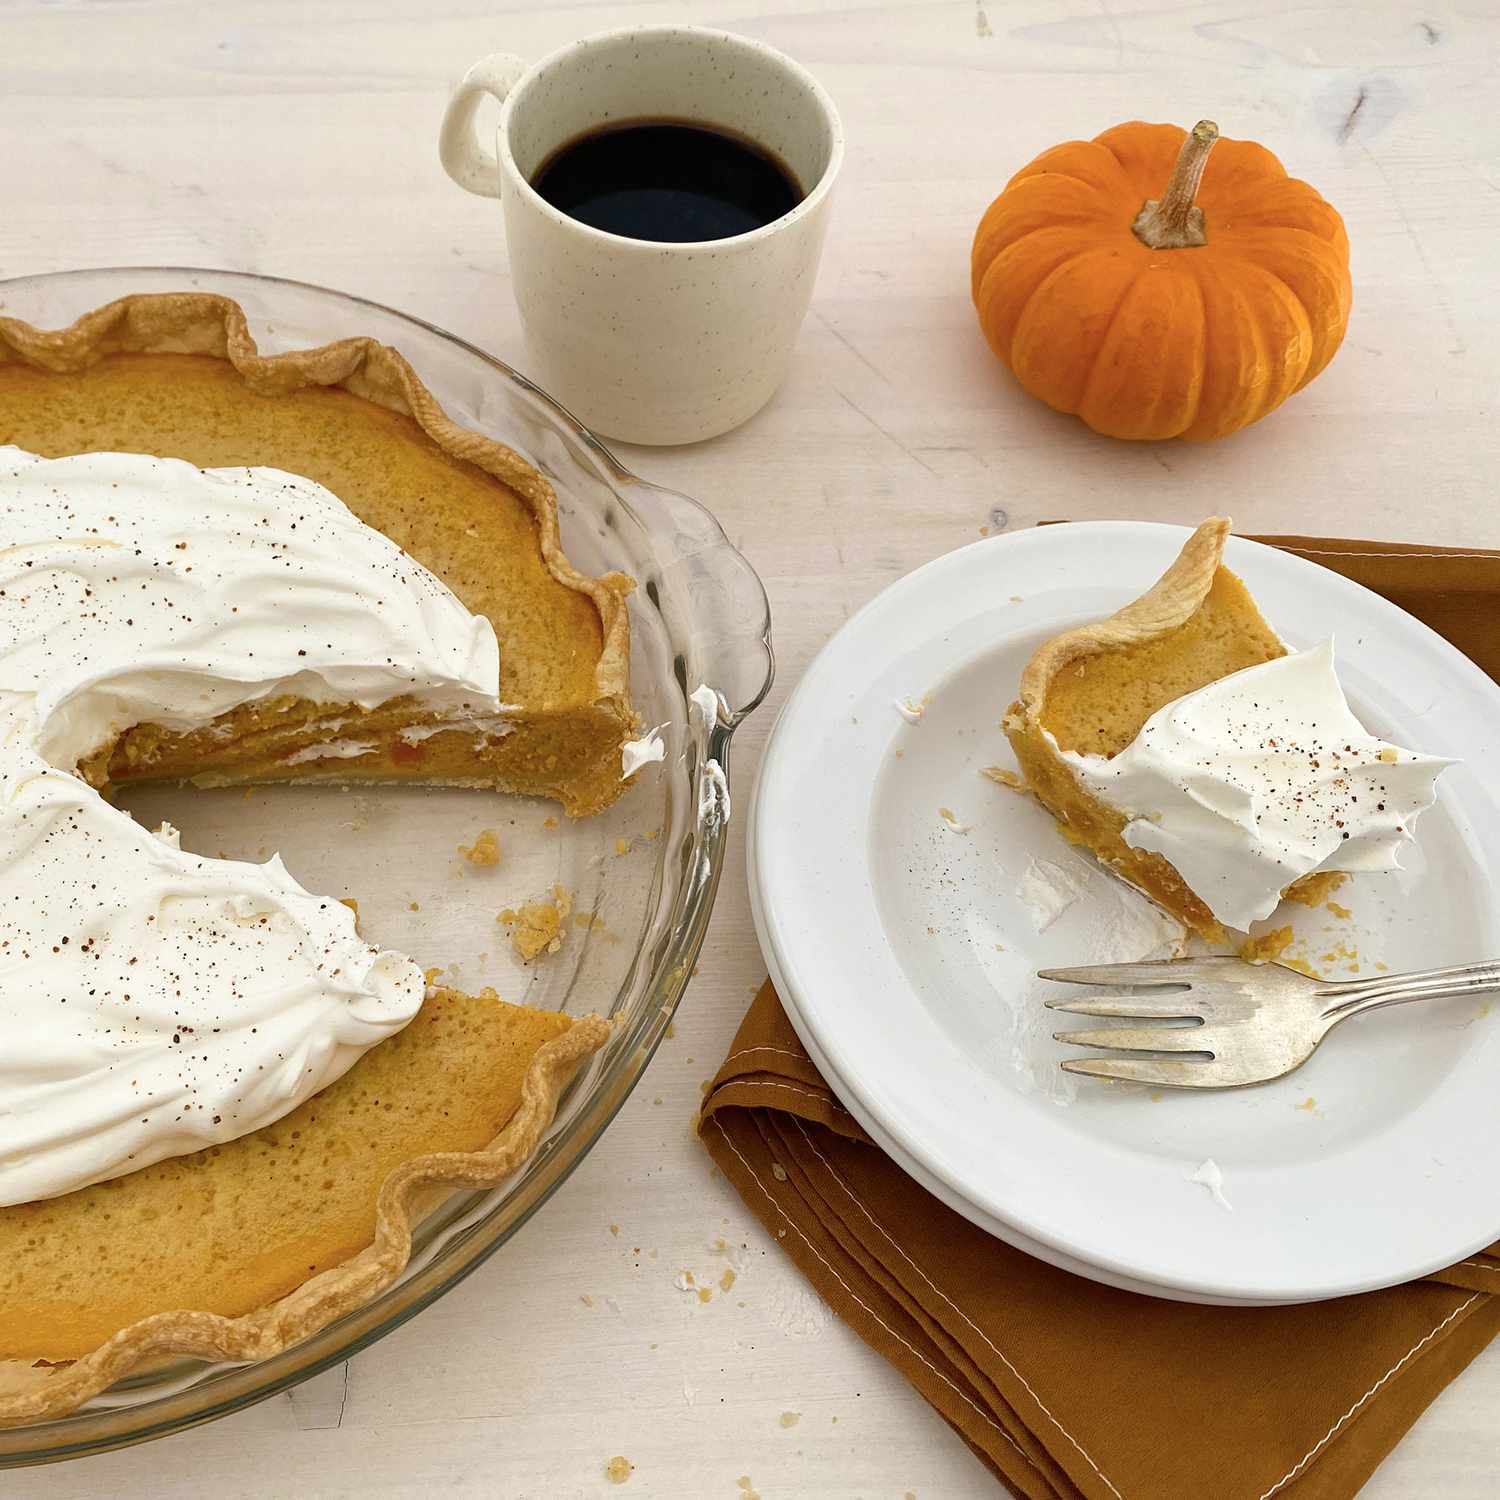 close up view of a Sweet Potato Pie with cream in a pie pan, a slice of Sweet Potato Pie on a white plate with a fork, a cup with coffee and a small pumpkin